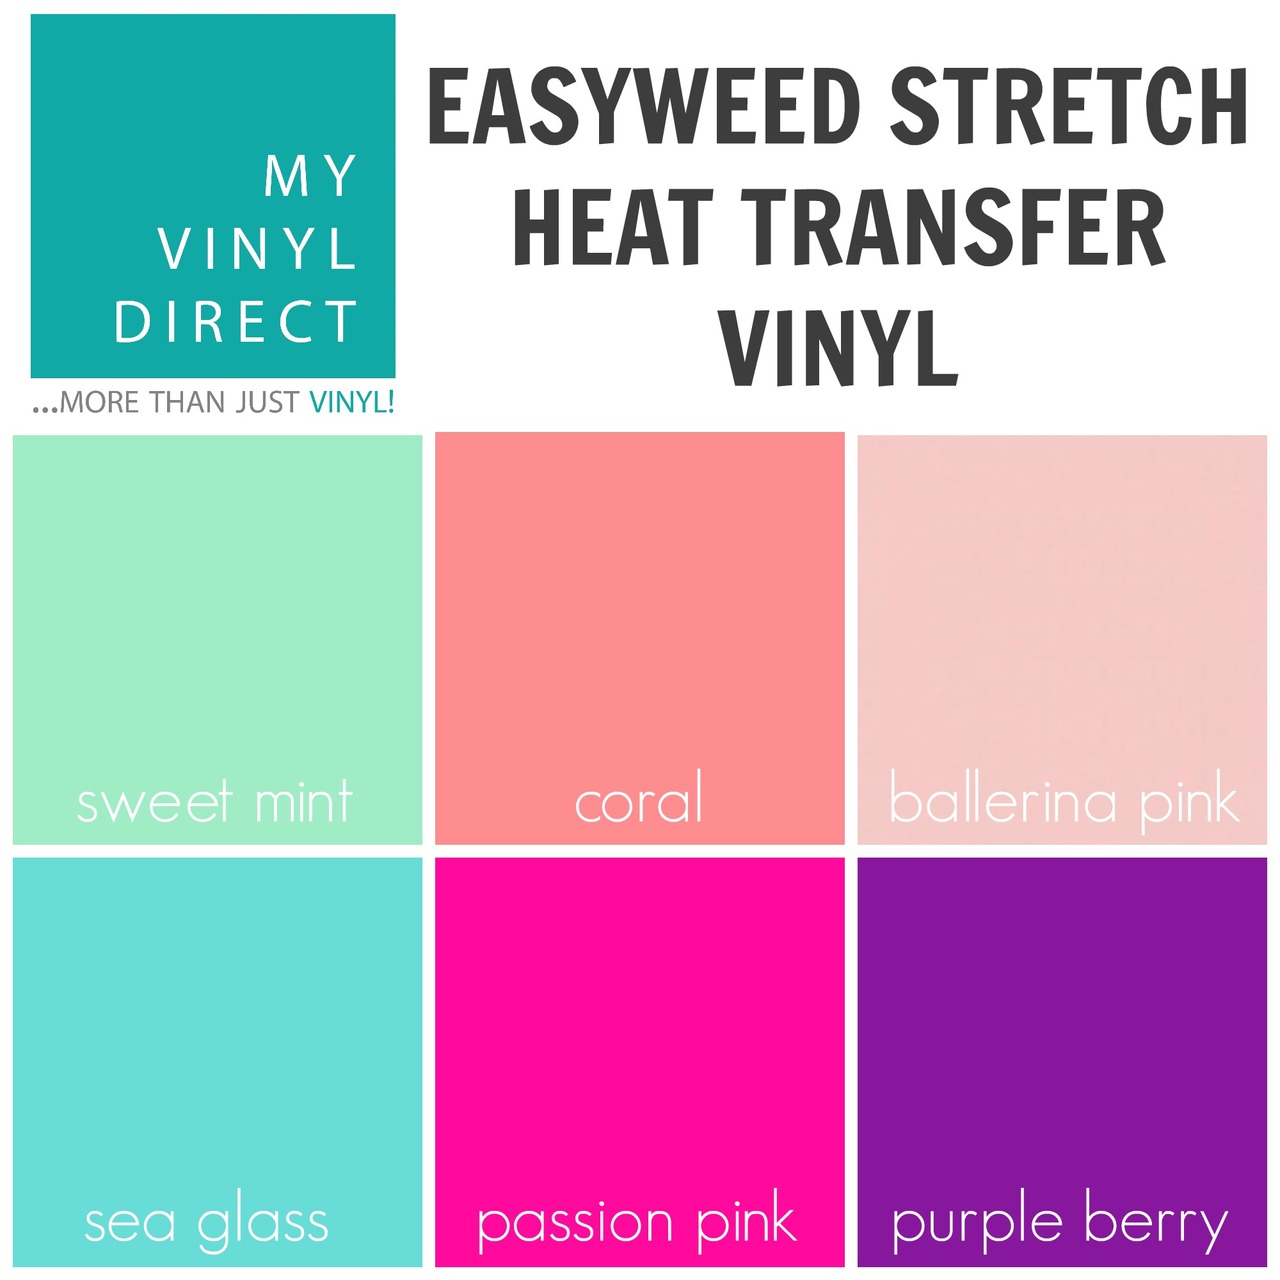 Siser EasyWeed HTV: 12 x 24 Sheet - Passion Pink